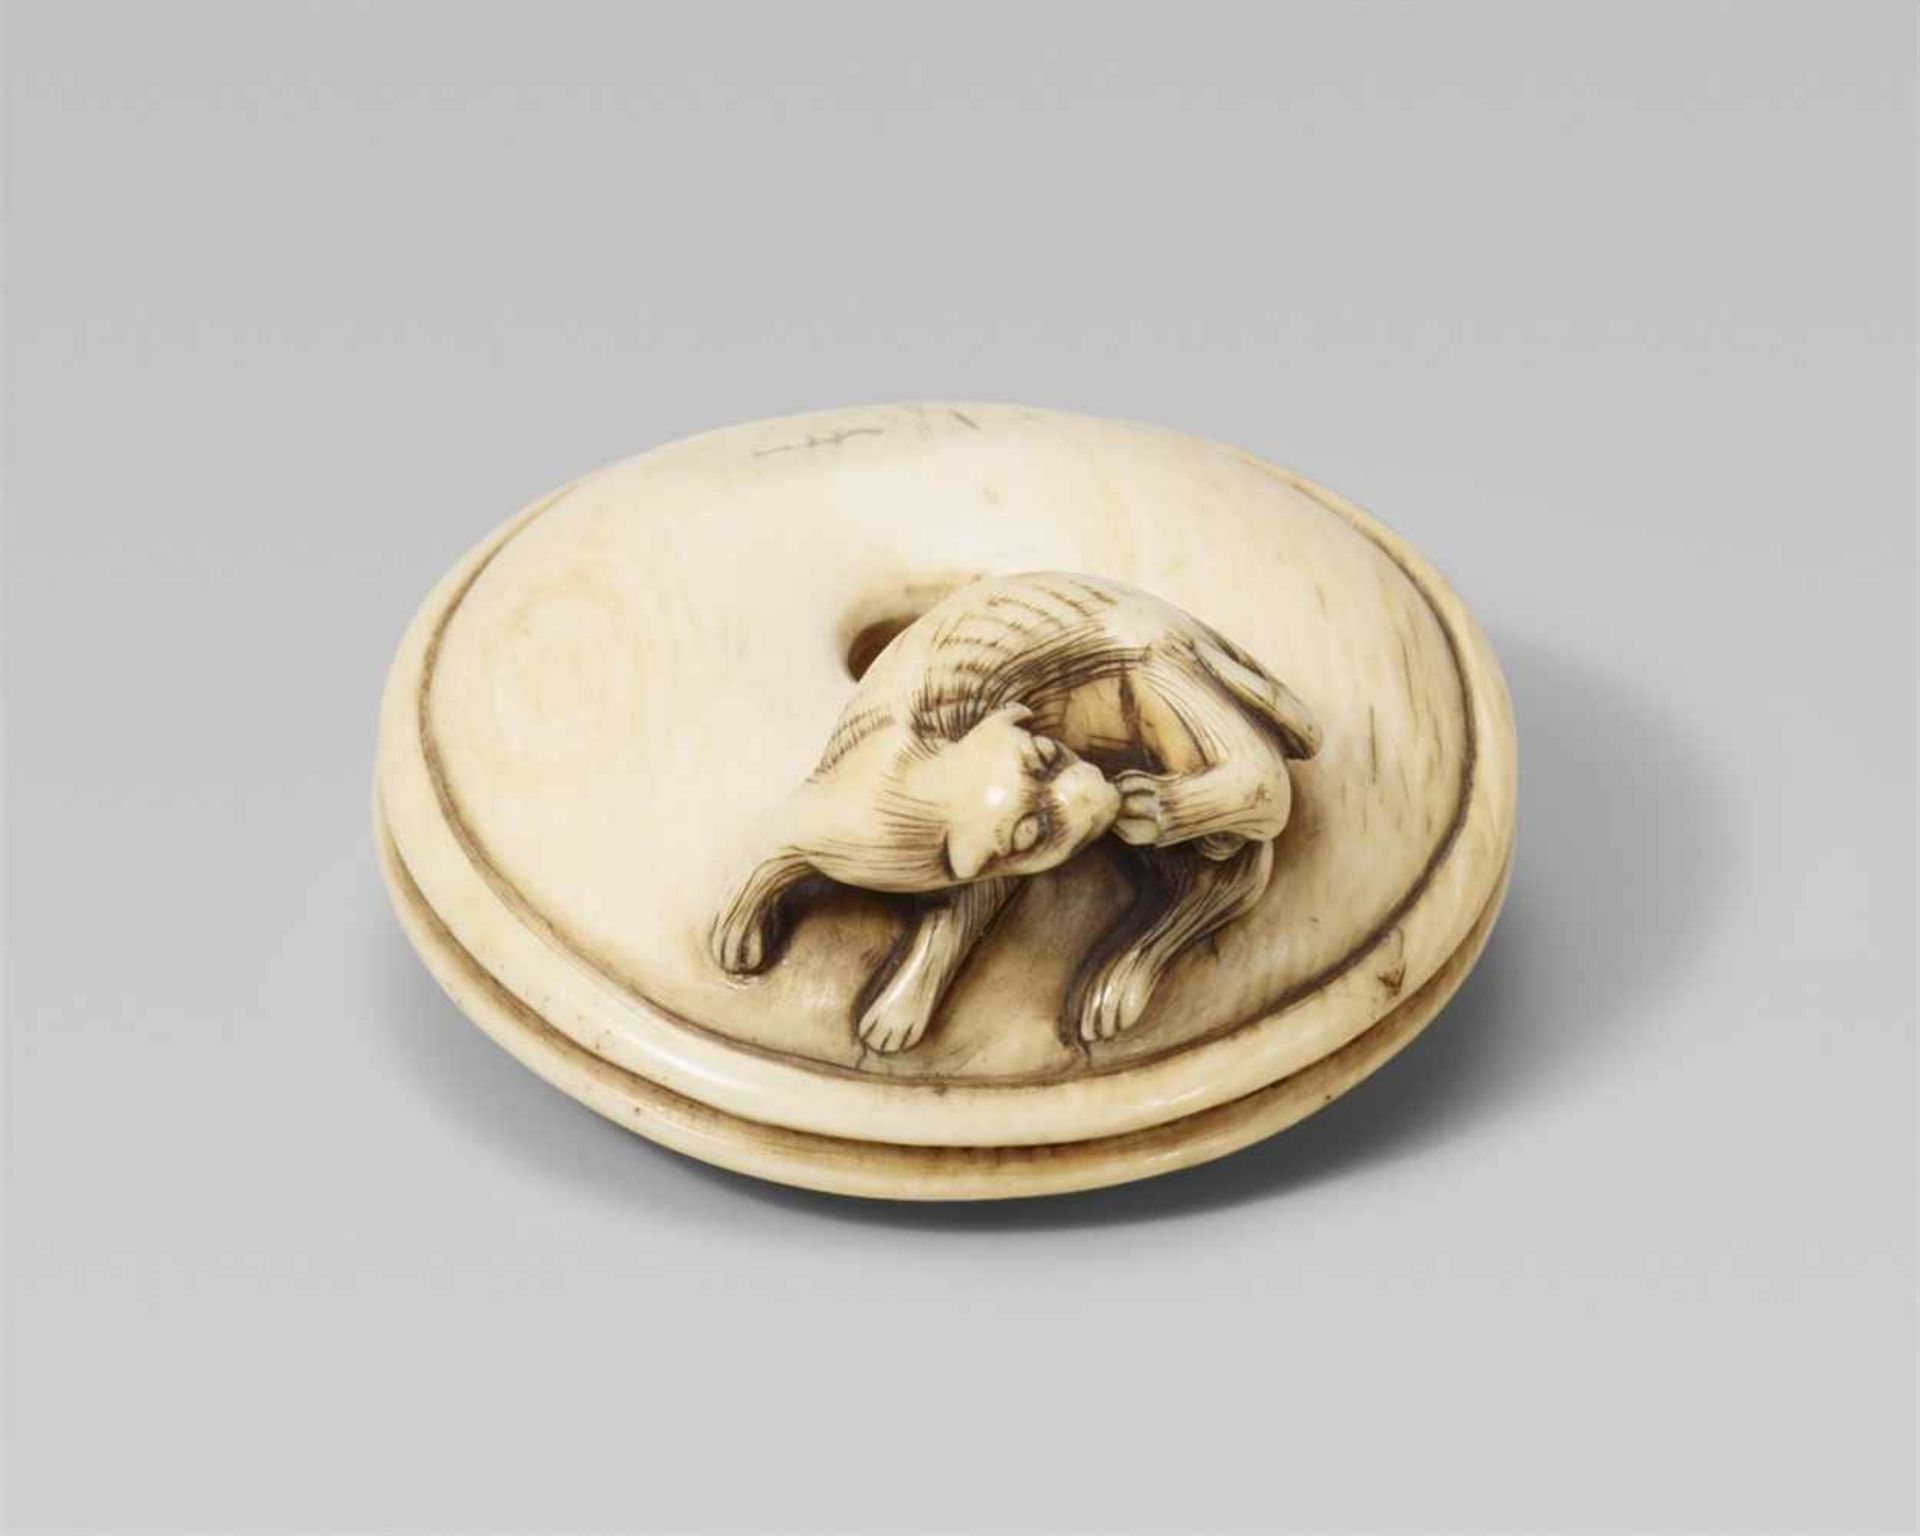 An ivory netsuke of a small skinny dog. 19th centuryReclining on a large round cushion with a